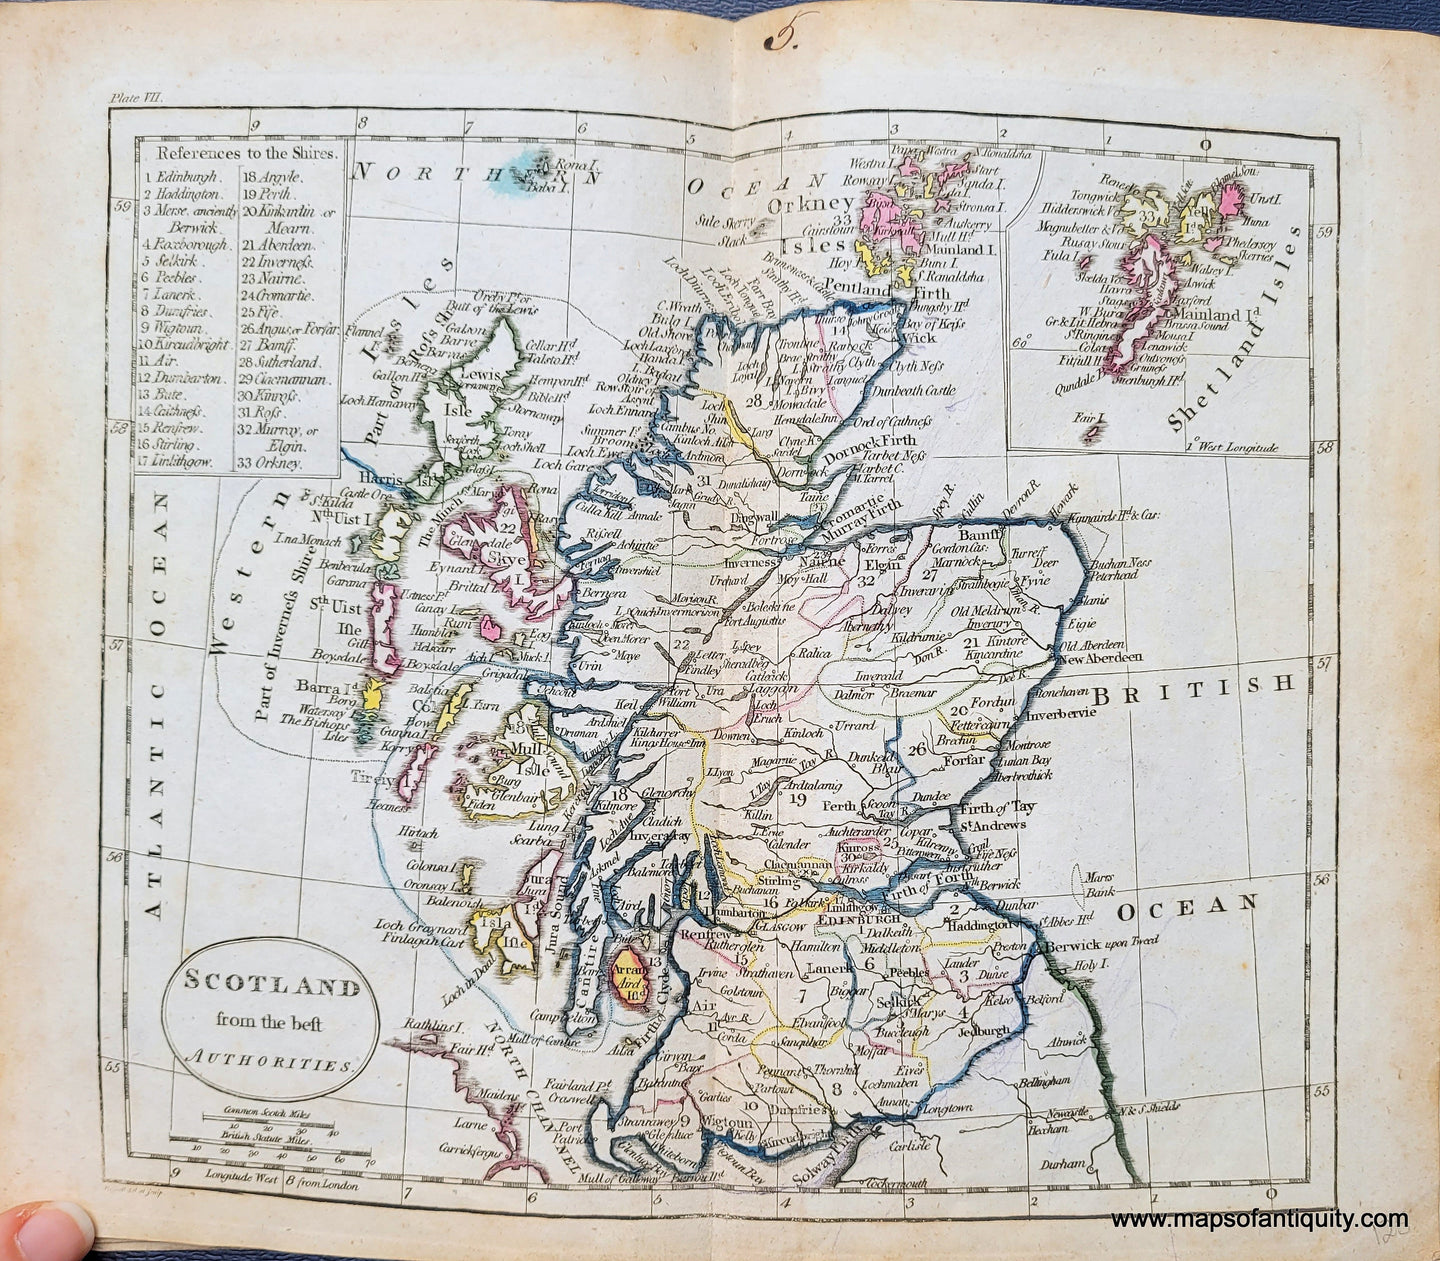 Genuine-Antique-Map-Scotland-from-the-best-Authorities-1800-Russell-Guthrie-Maps-Of-Antiquity